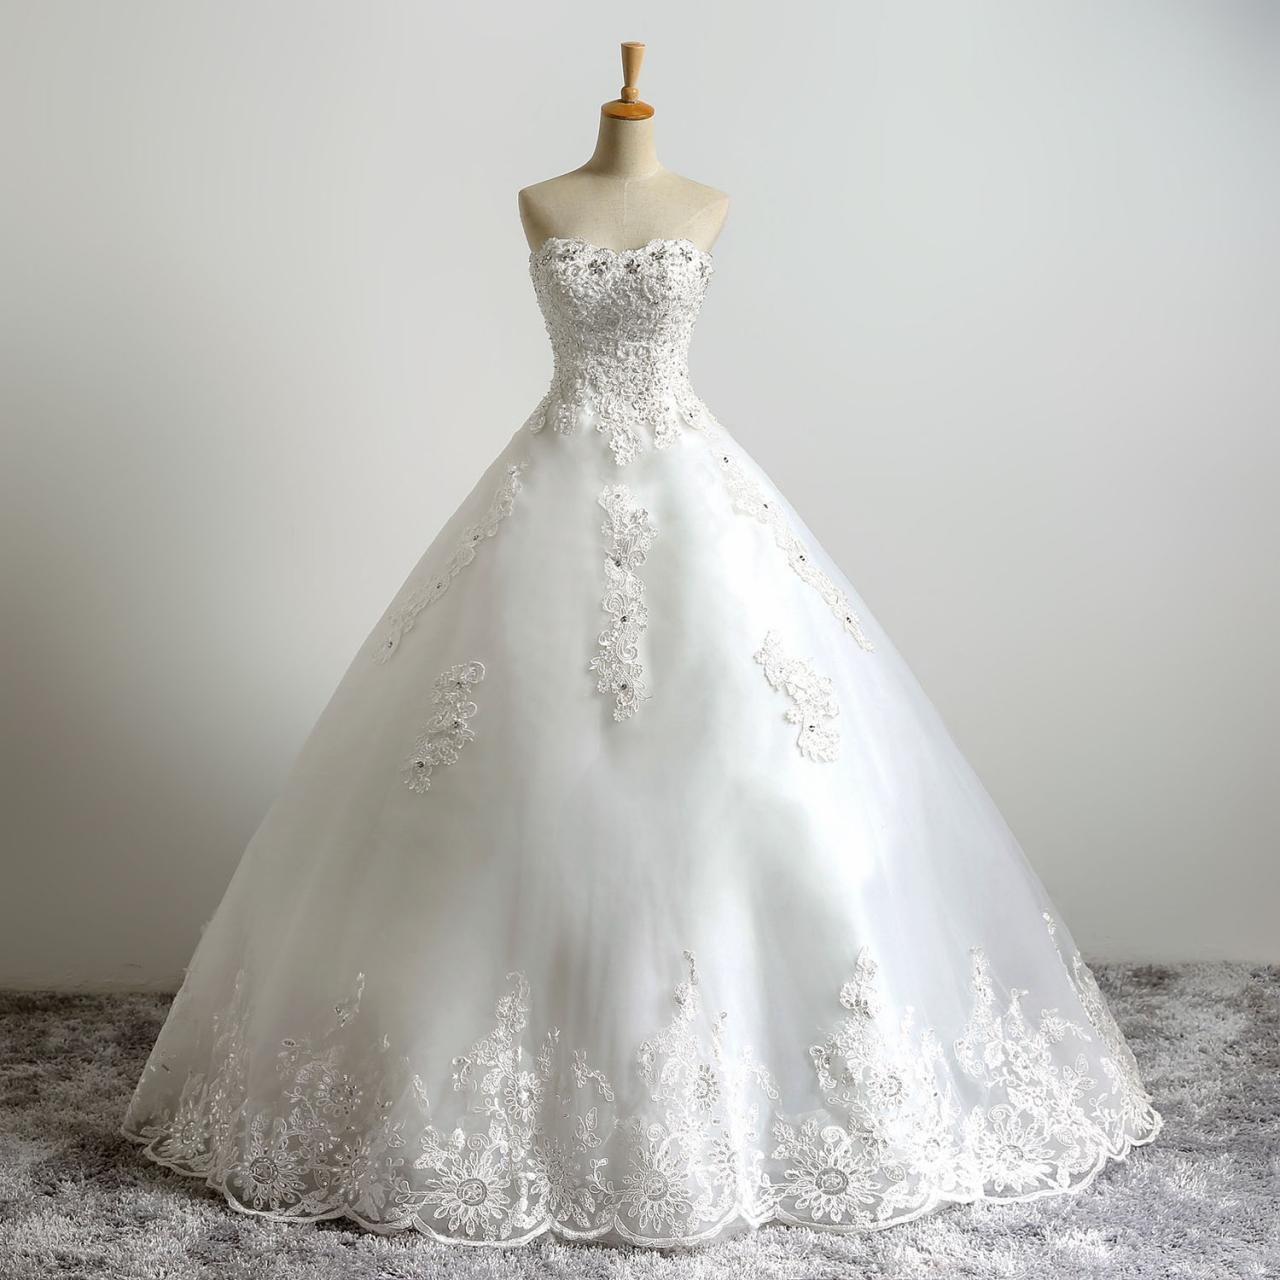 Ivory Floor Length Lace Tulle Wedding Gown Featuring Lace Appliqués And ...